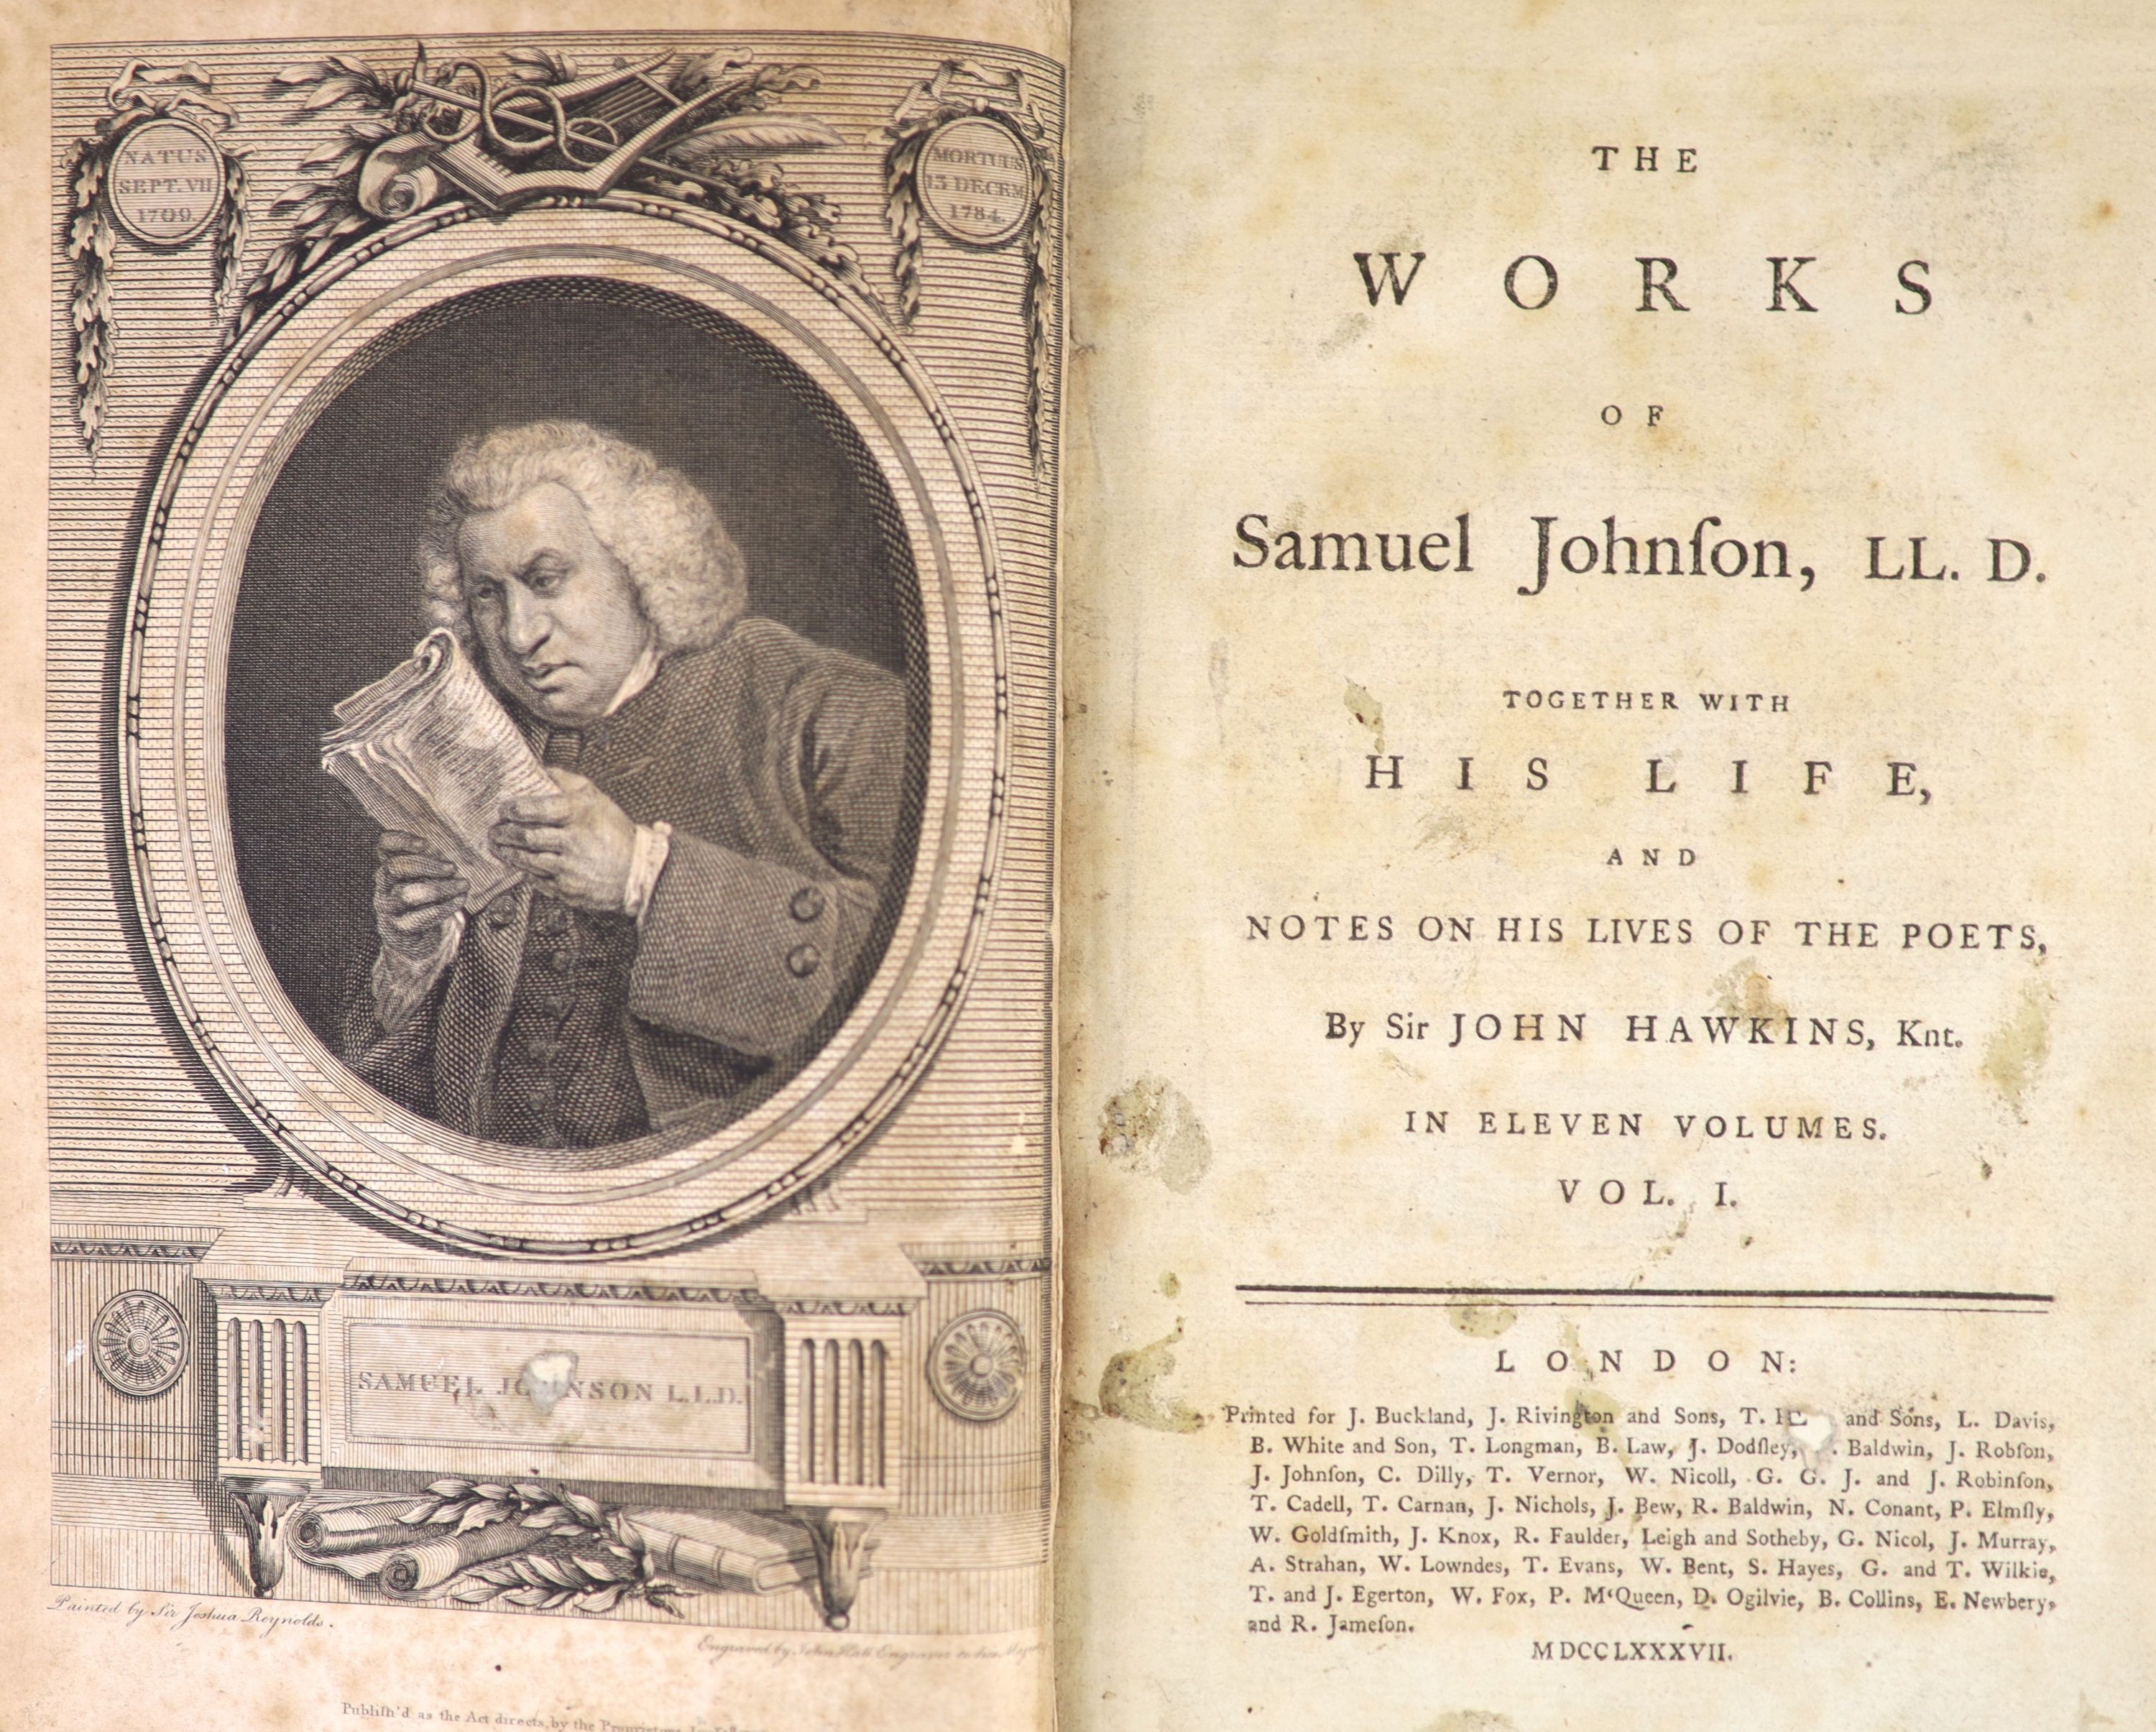 Johnson, Samuel - The Works of ..... together with His Life, and Notes on His Lives of the Poets, by Sir John Hawkins ... 11 vols., portrait frontis.; sometime rebound